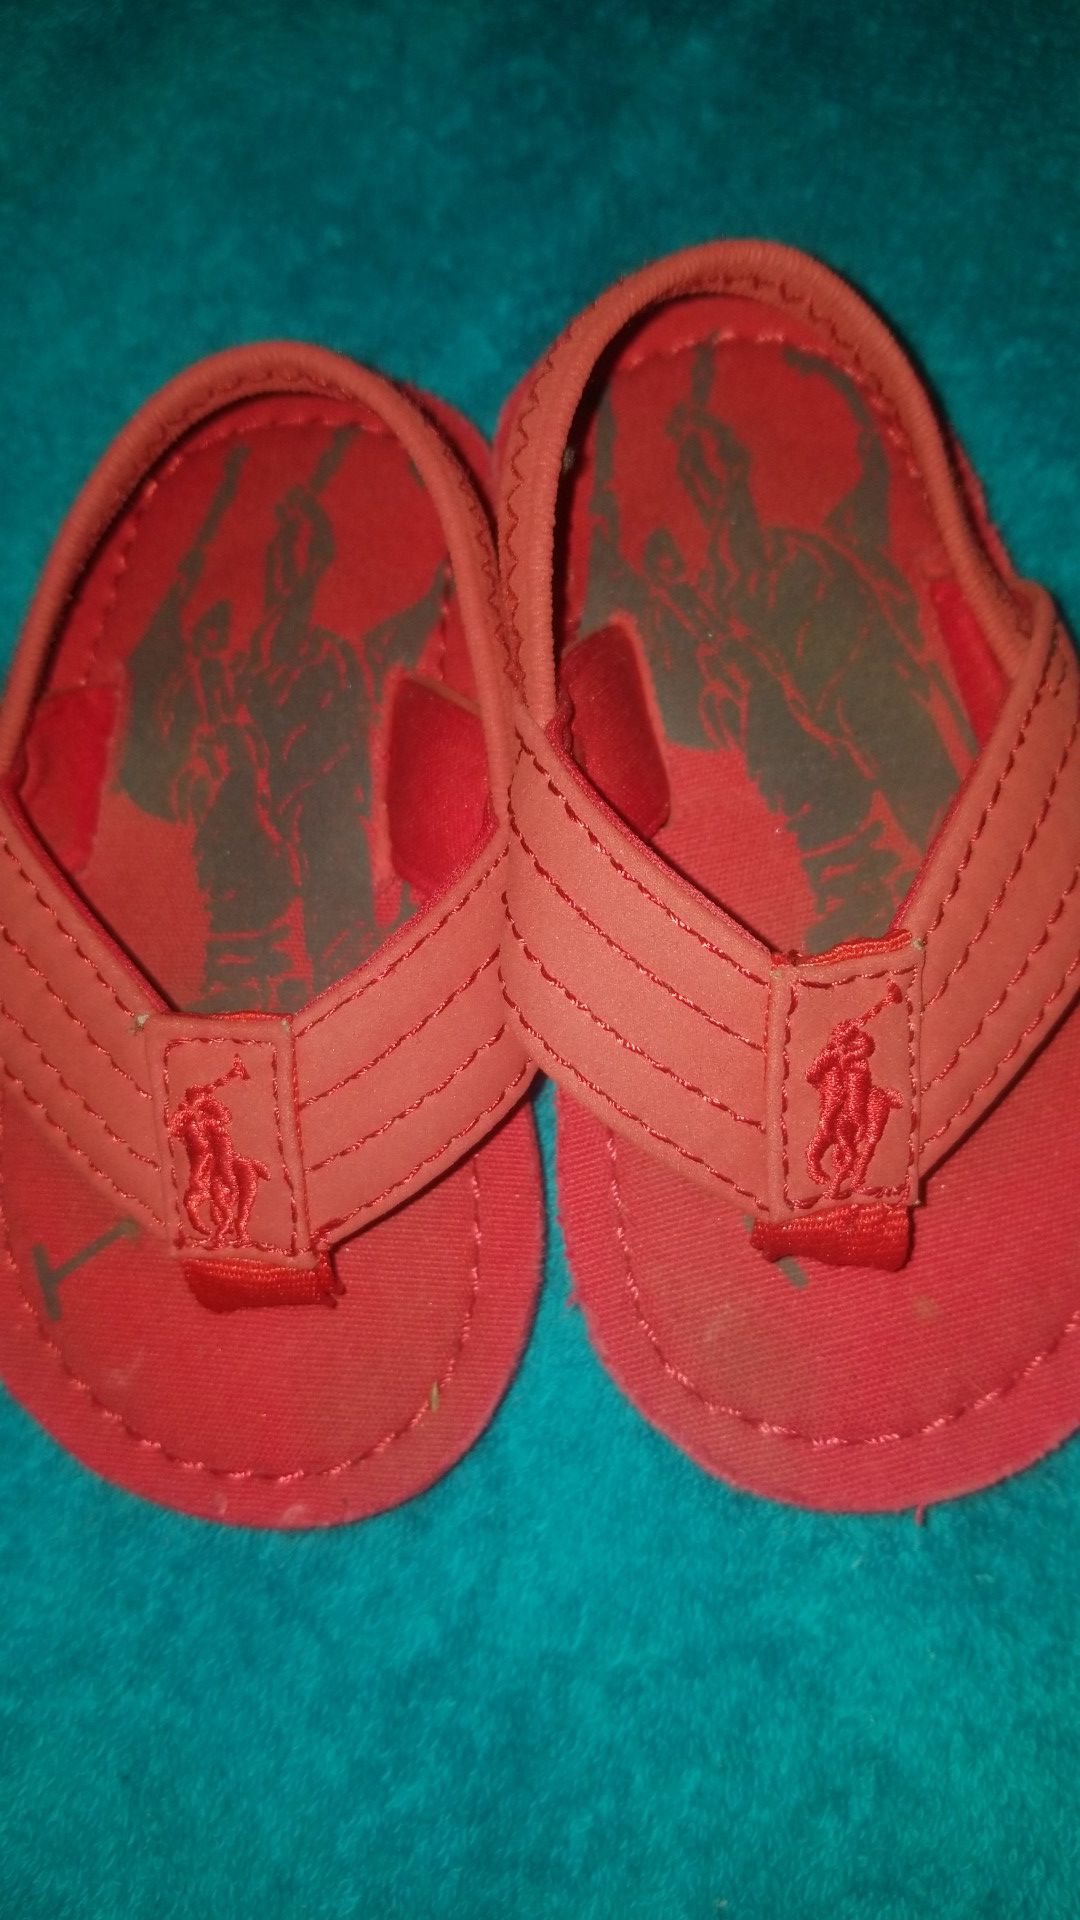 Baby polo sandals size 7